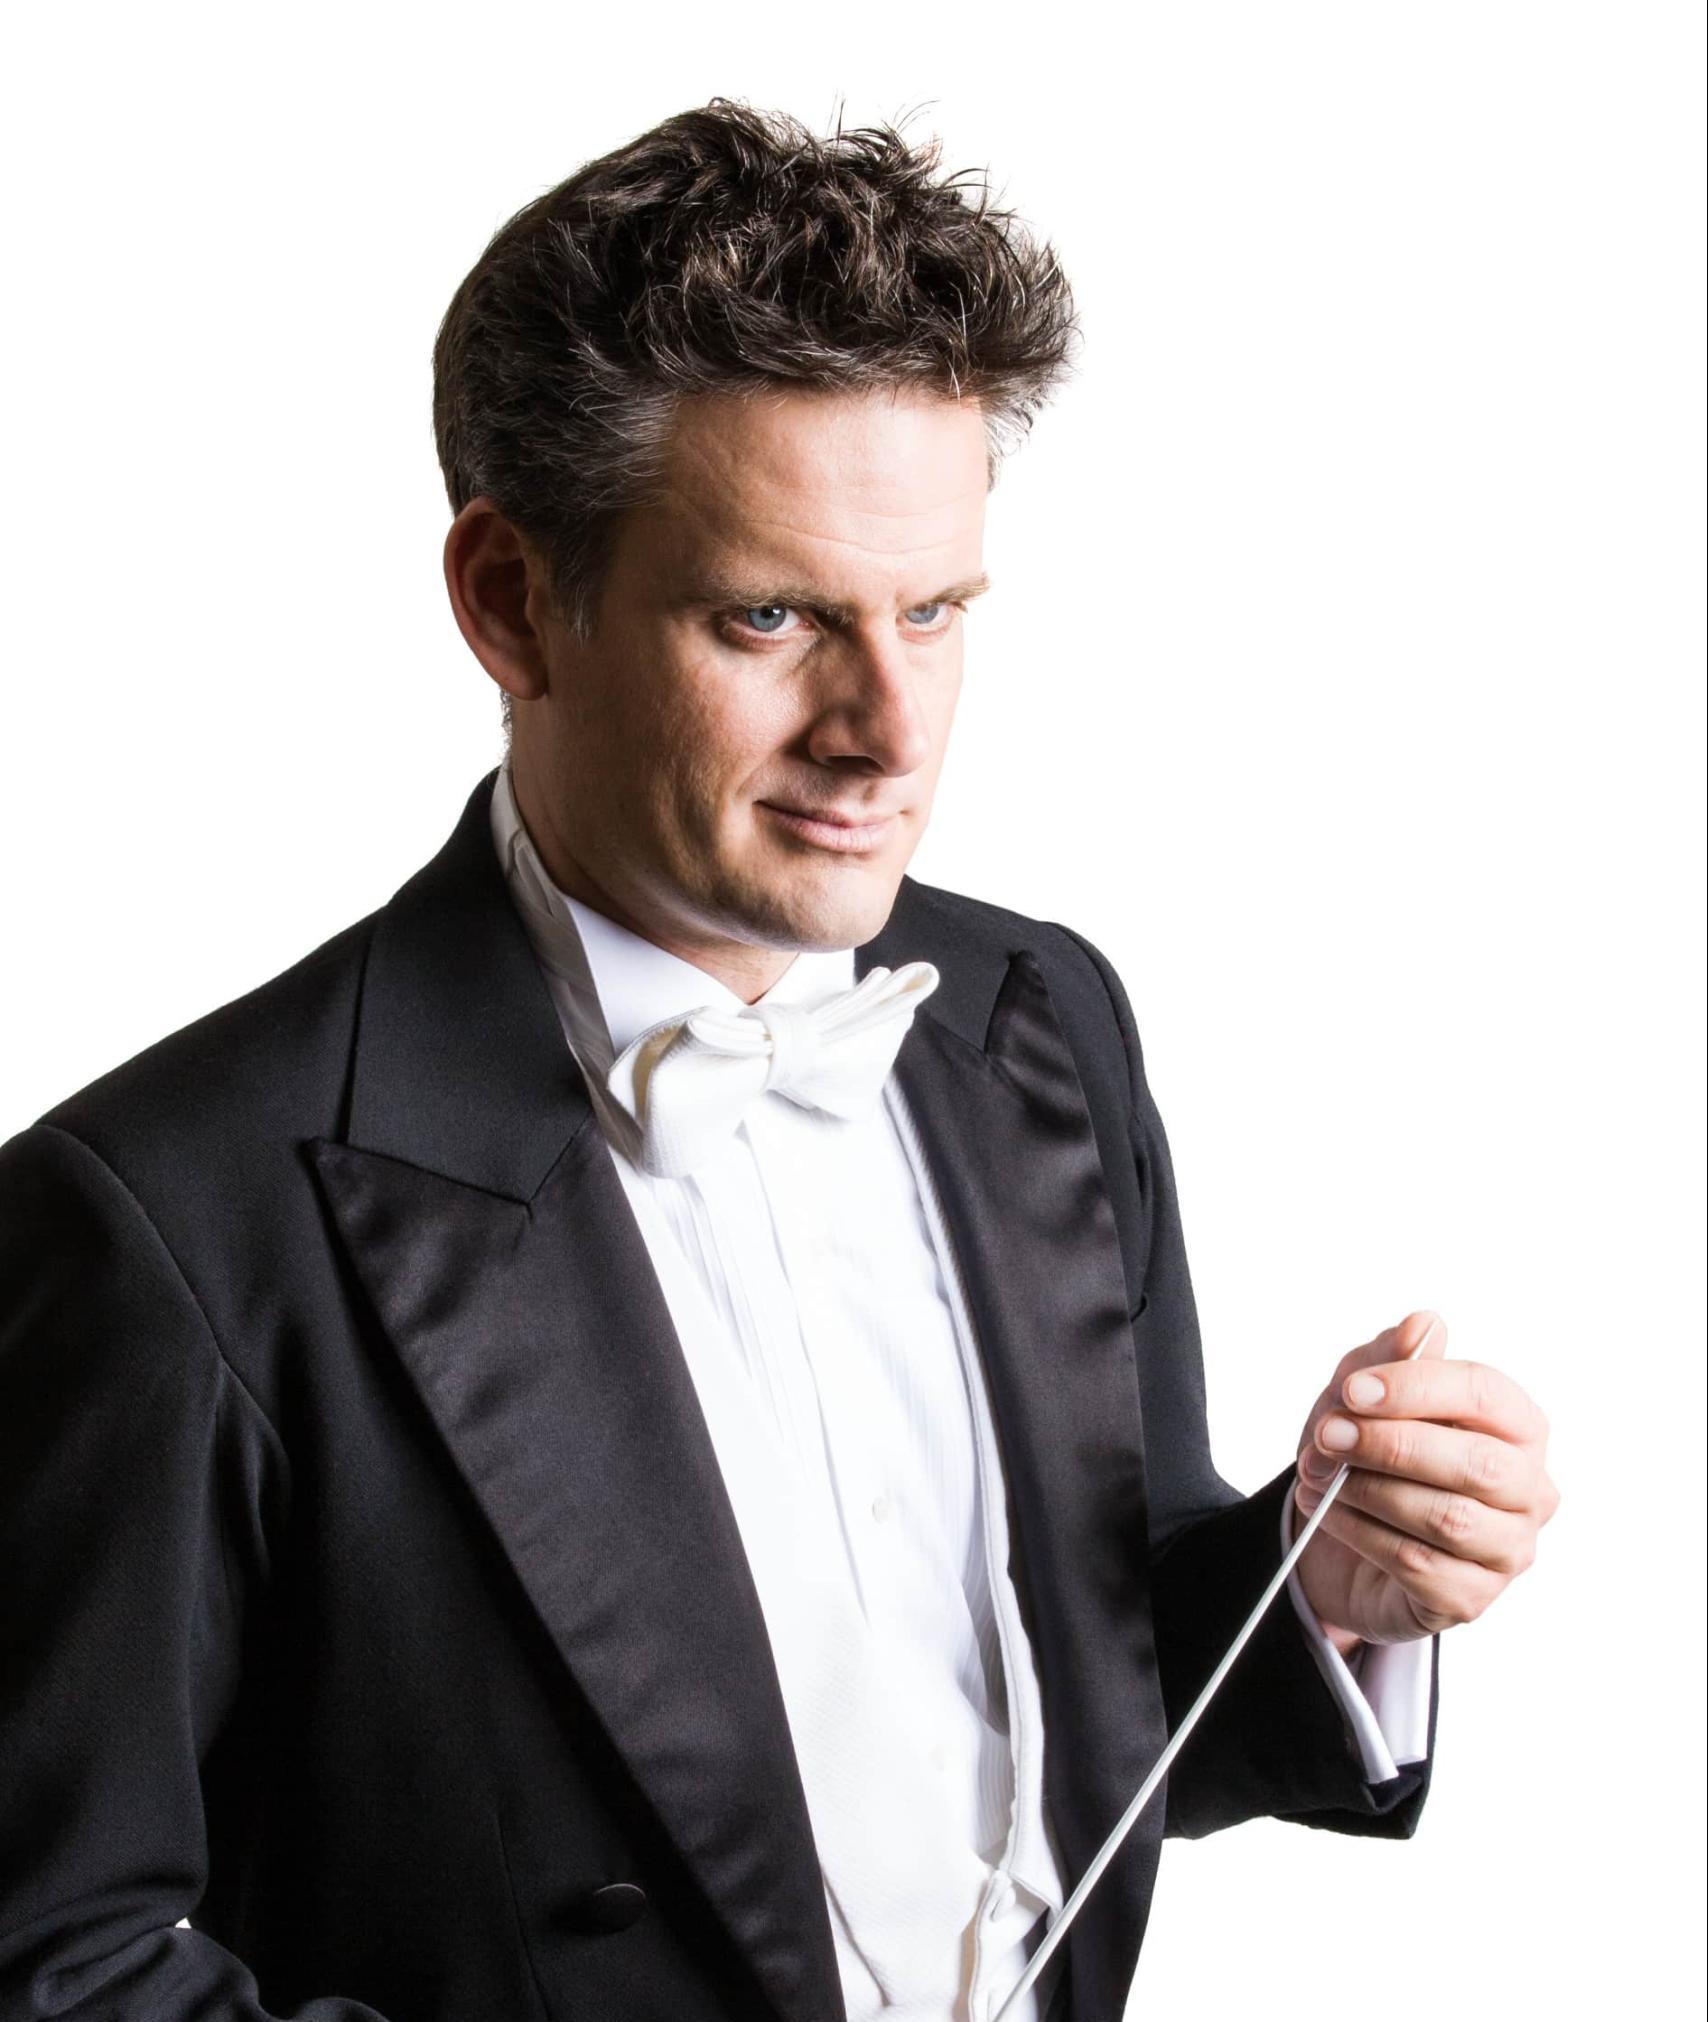 Portrait shot of conductor Philippe Jordan holding his baton in his hands
